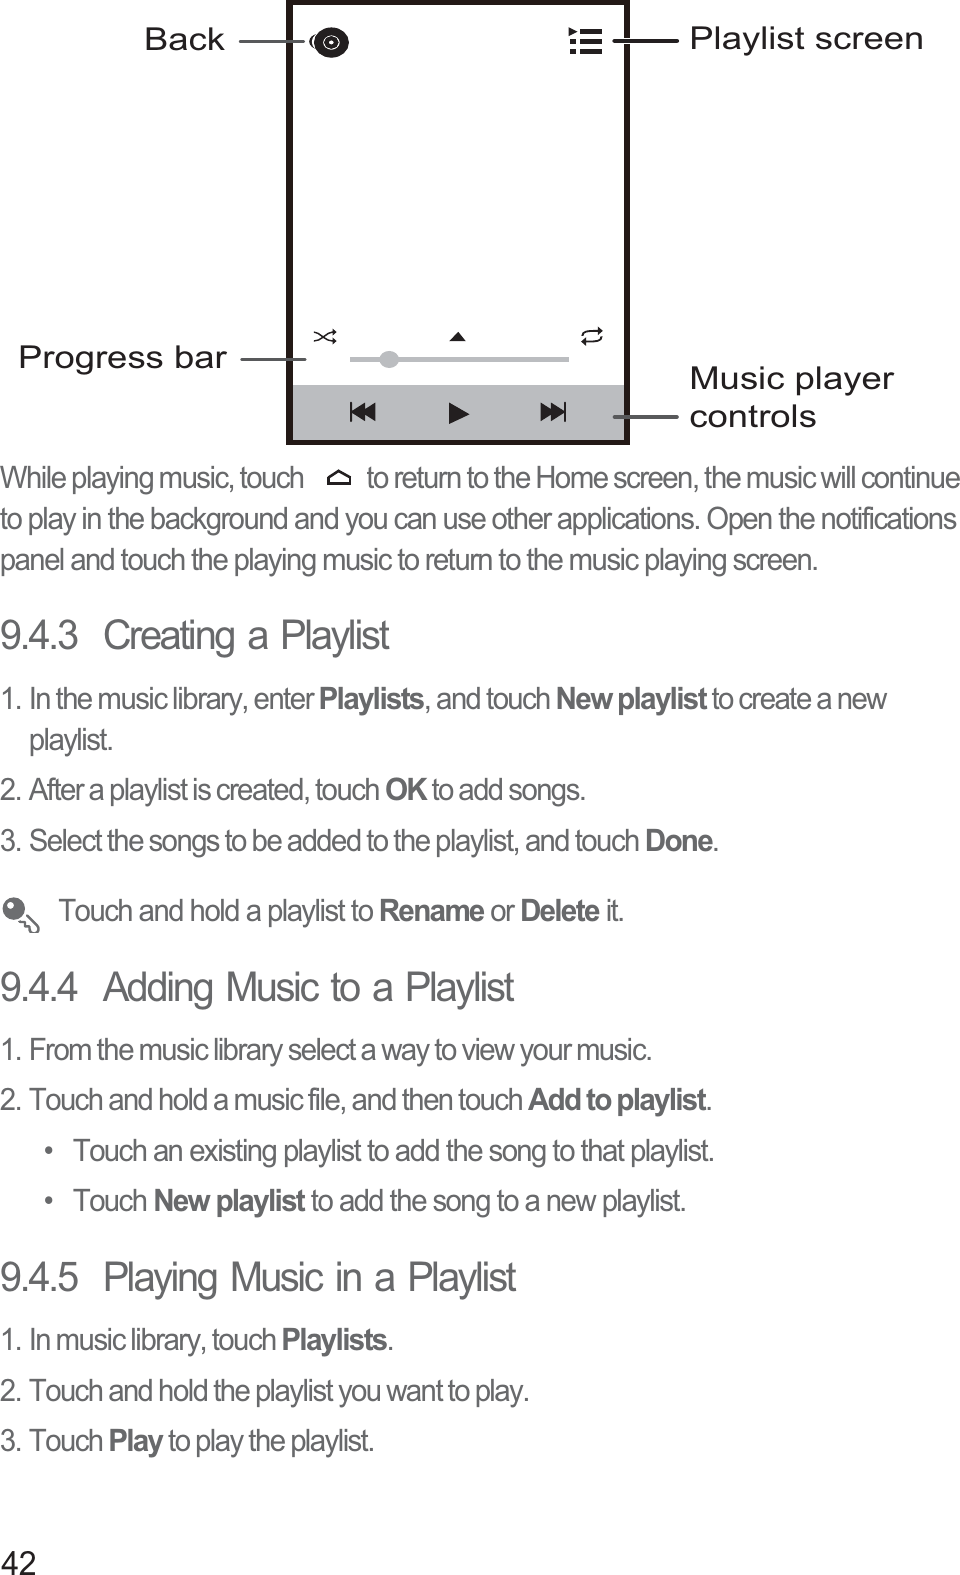 42While playing music, touch  to return to the Home screen, the music will continue to play in the background and you can use other applications. Open the notifications panel and touch the playing music to return to the music playing screen.9.4.3  Creating a Playlist1. In the music library, enter Playlists, and touch New playlist to create a new playlist.2. After a playlist is created, touch OK to add songs.3. Select the songs to be added to the playlist, and touch Done. Touch and hold a playlist to Rename or Delete it.9.4.4  Adding Music to a Playlist1. From the music library select a way to view your music.2. Touch and hold a music file, and then touch Add to playlist.•  Touch an existing playlist to add the song to that playlist.• Touch New playlist to add the song to a new playlist.9.4.5  Playing Music in a Playlist1. In music library, touch Playlists.2. Touch and hold the playlist you want to play.3. Touch Play to play the playlist.Back Playlist screenMusic player controlsProgress bar